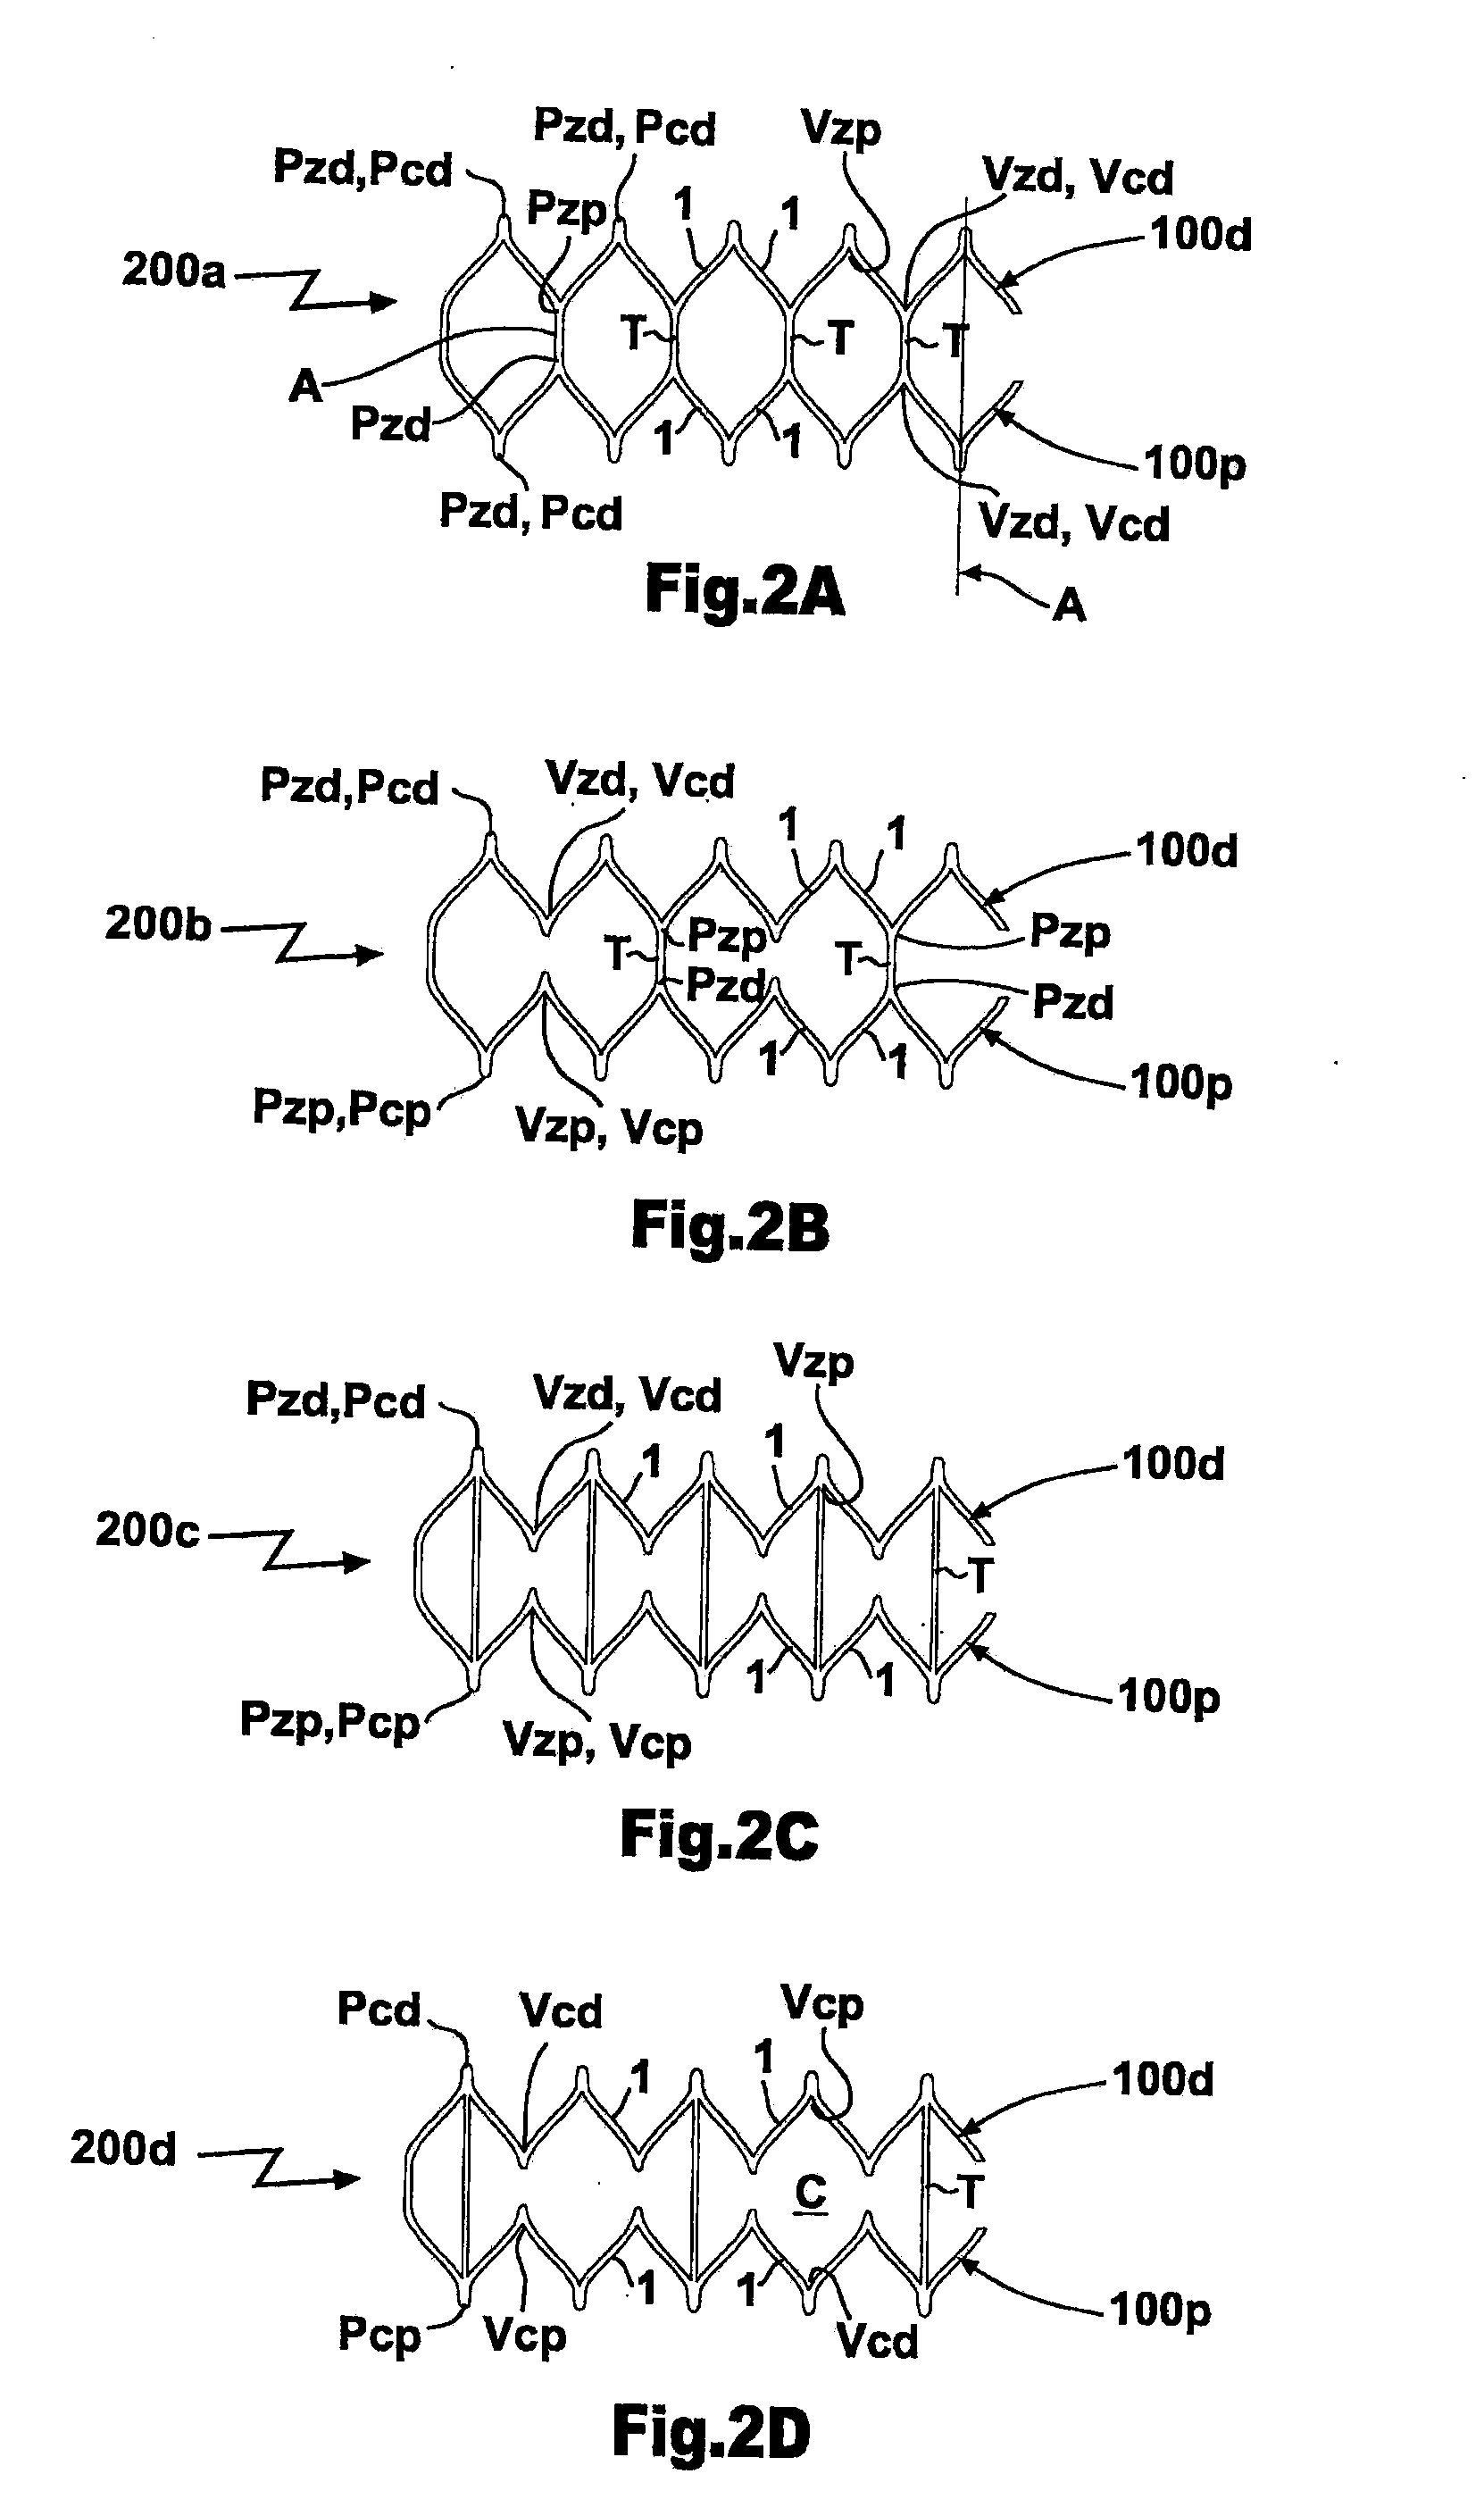 Multi-Segment Modular Stent And Methods For Manufacturing Stents